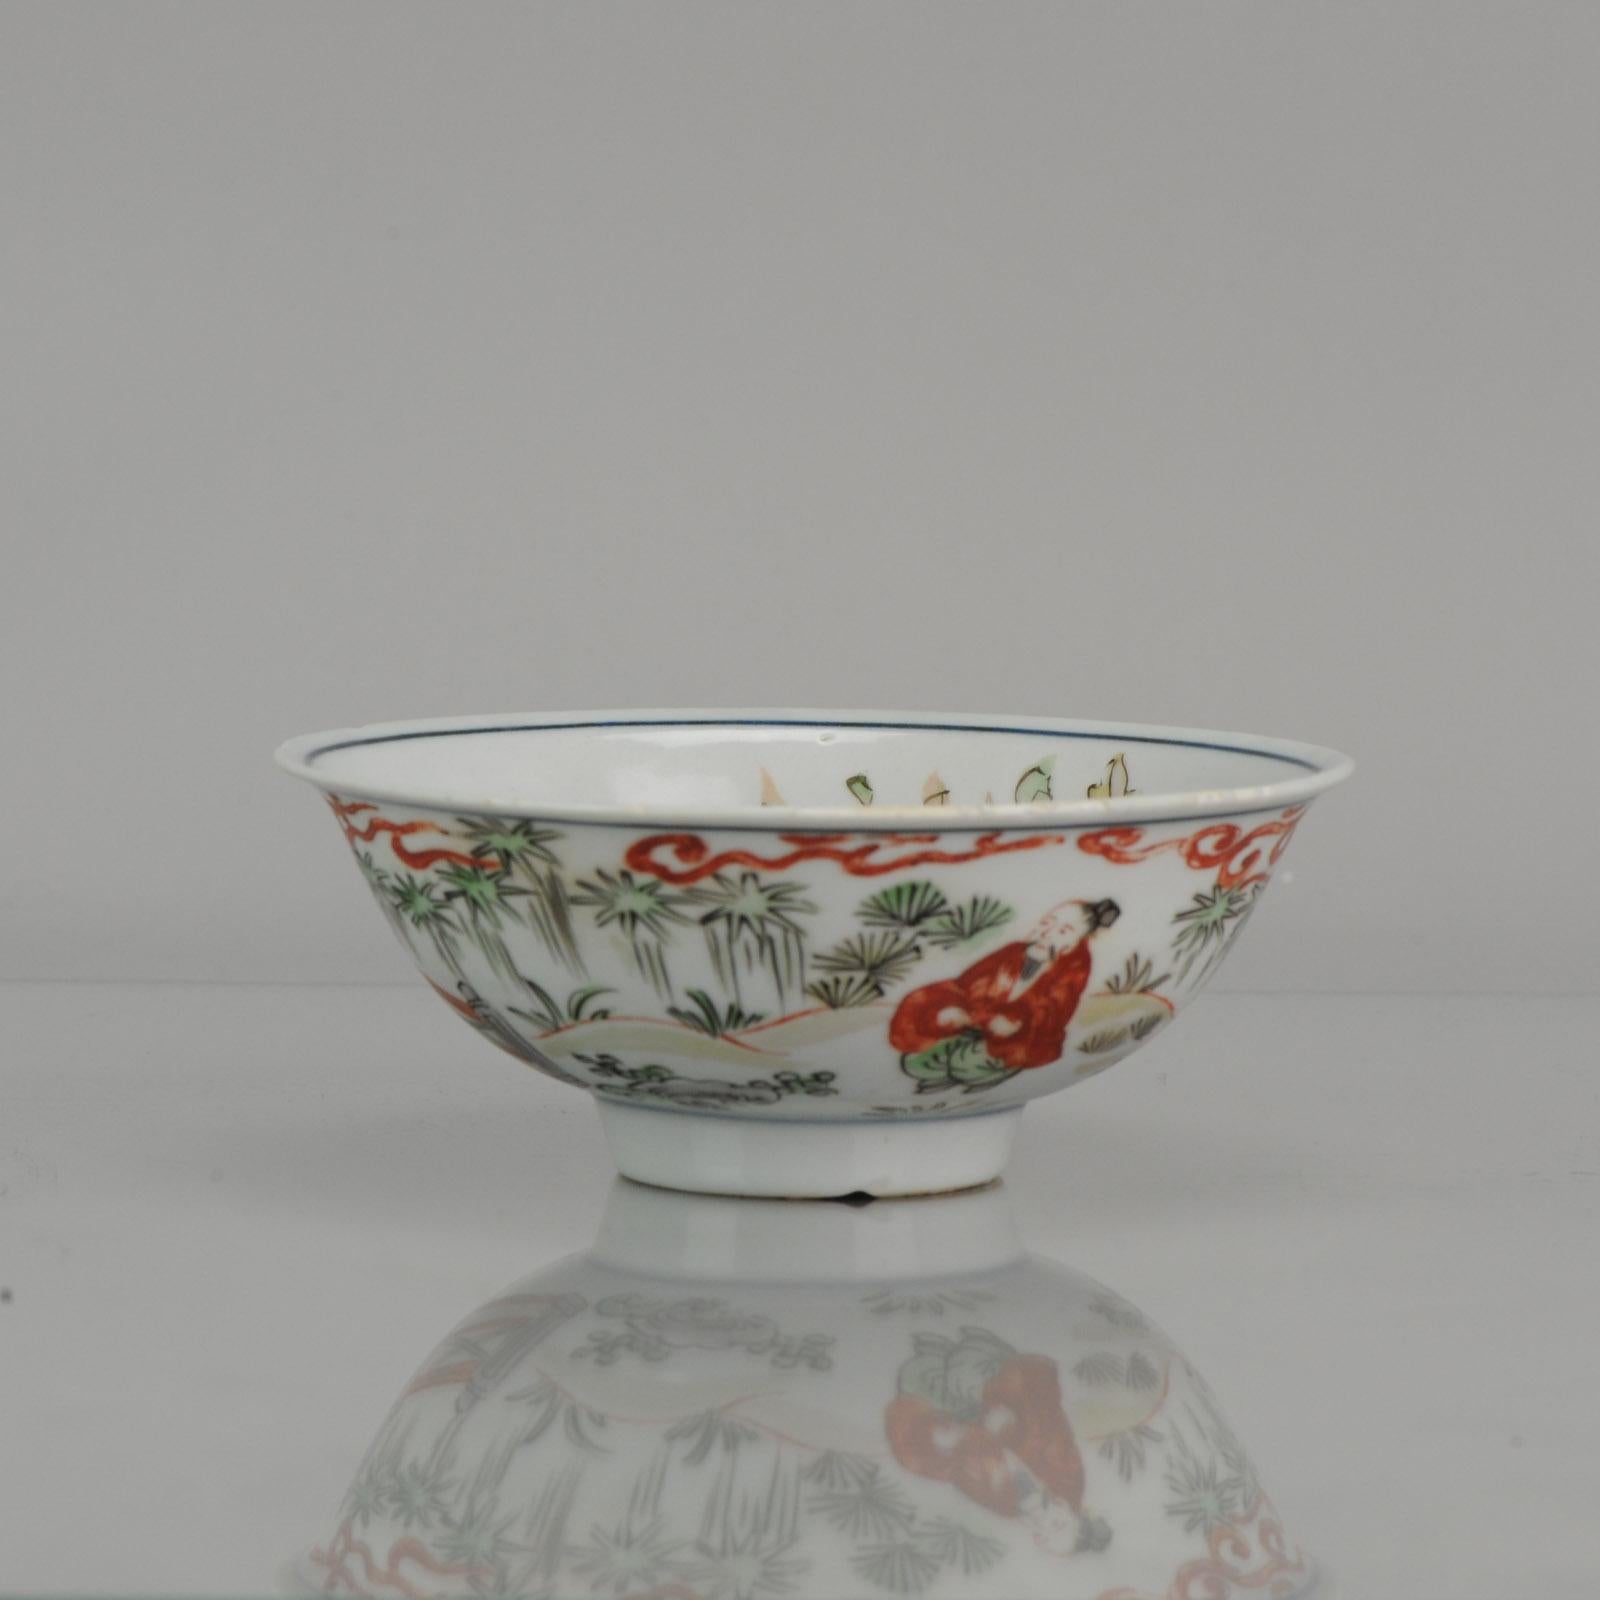 Antique Chinese Porcelain Bowl Ko-Akae Famille Verte Marked Figures in In Good Condition For Sale In Amsterdam, Noord Holland